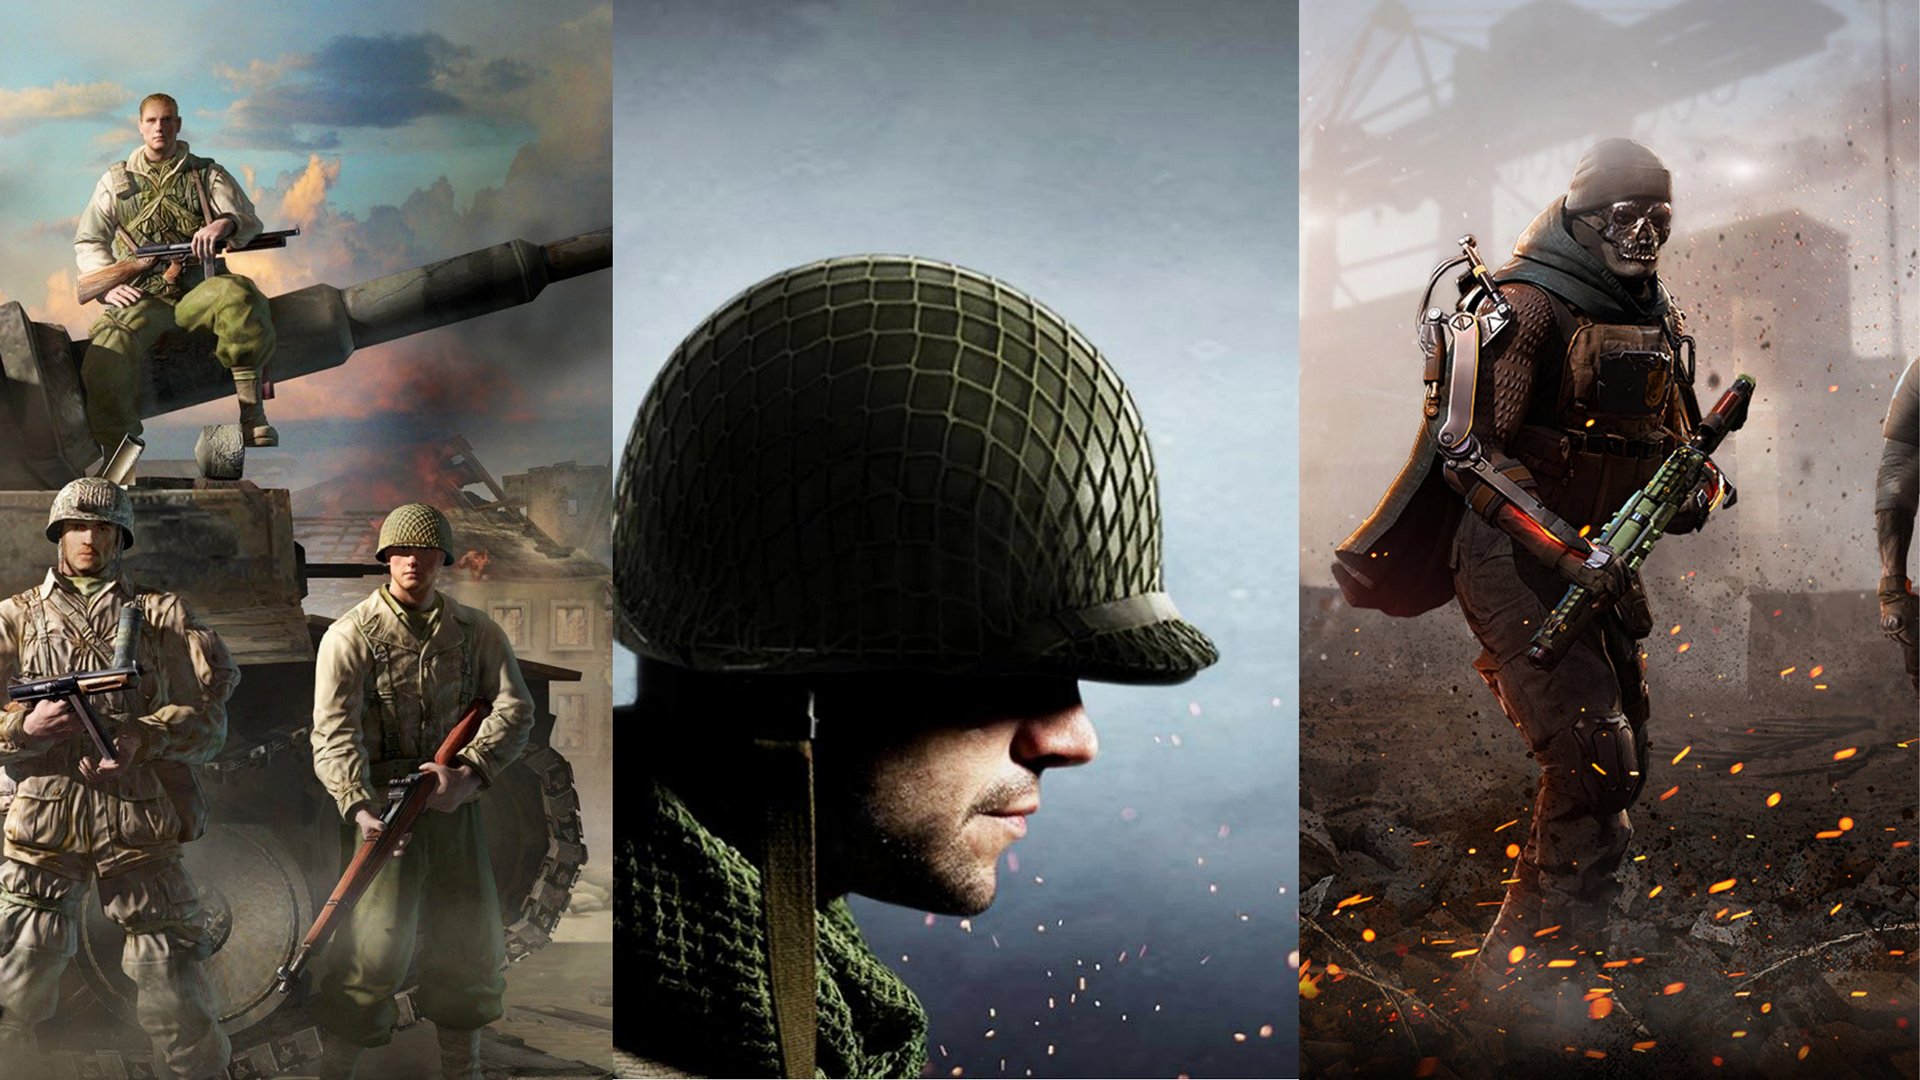 Best free Military Simulation Games for PCs and Laptops